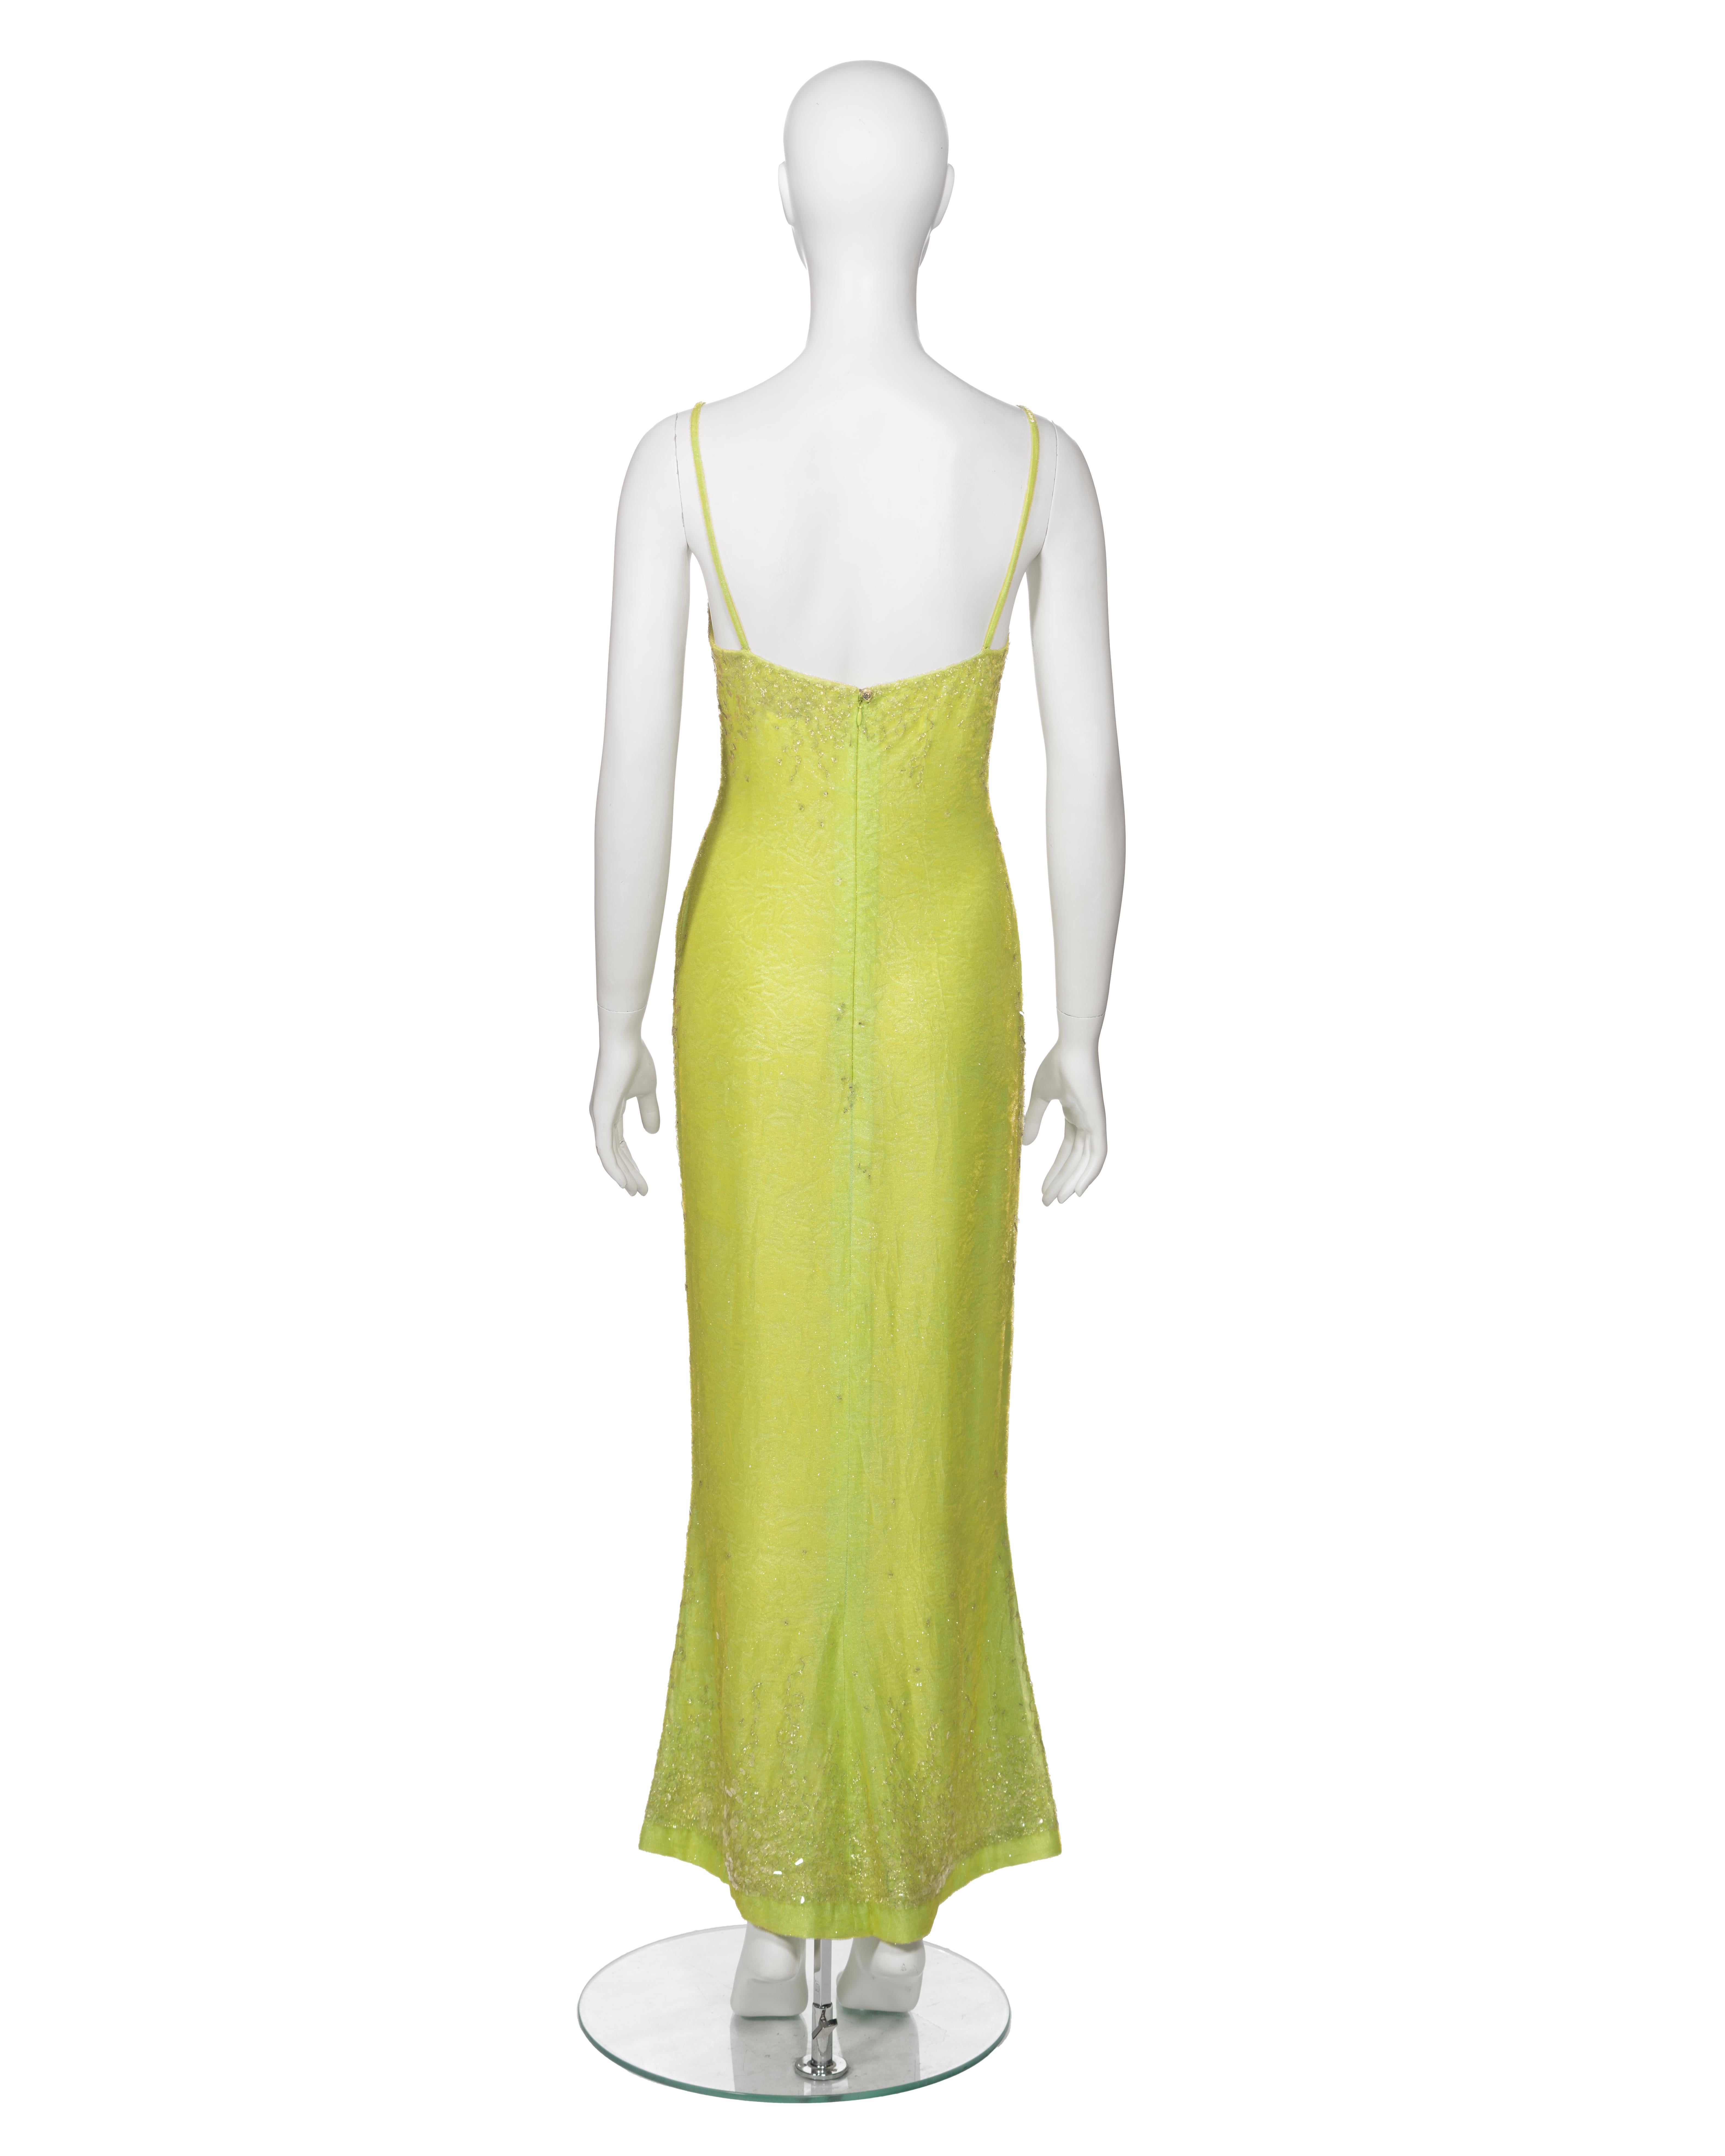 Chanel by Karl Lagerfeld Embellished Lime Green Velvet Dress and Jacket, ss 1997 For Sale 11